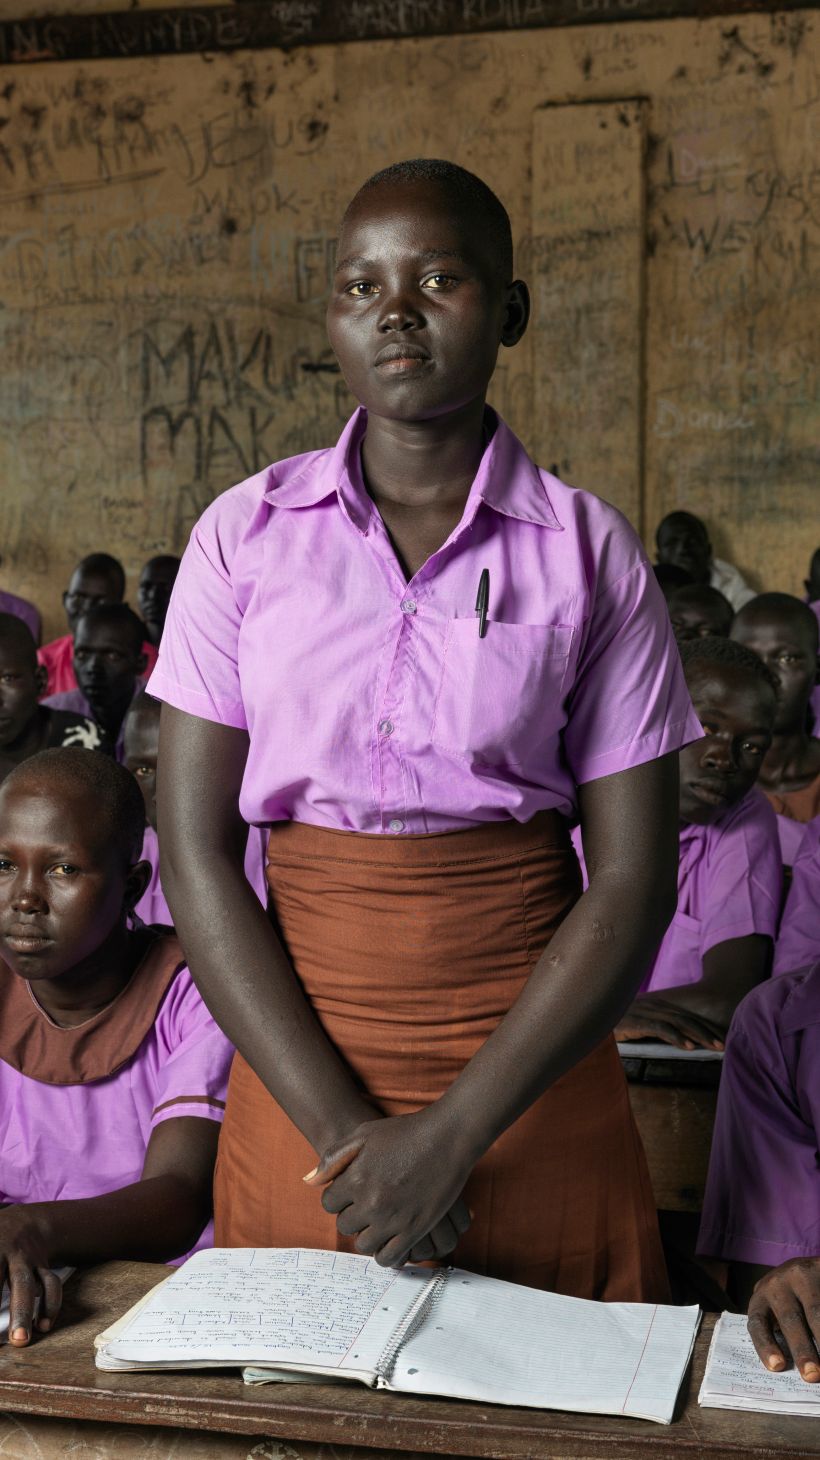 A photo of Hellena standing in a classroom of students sitting.